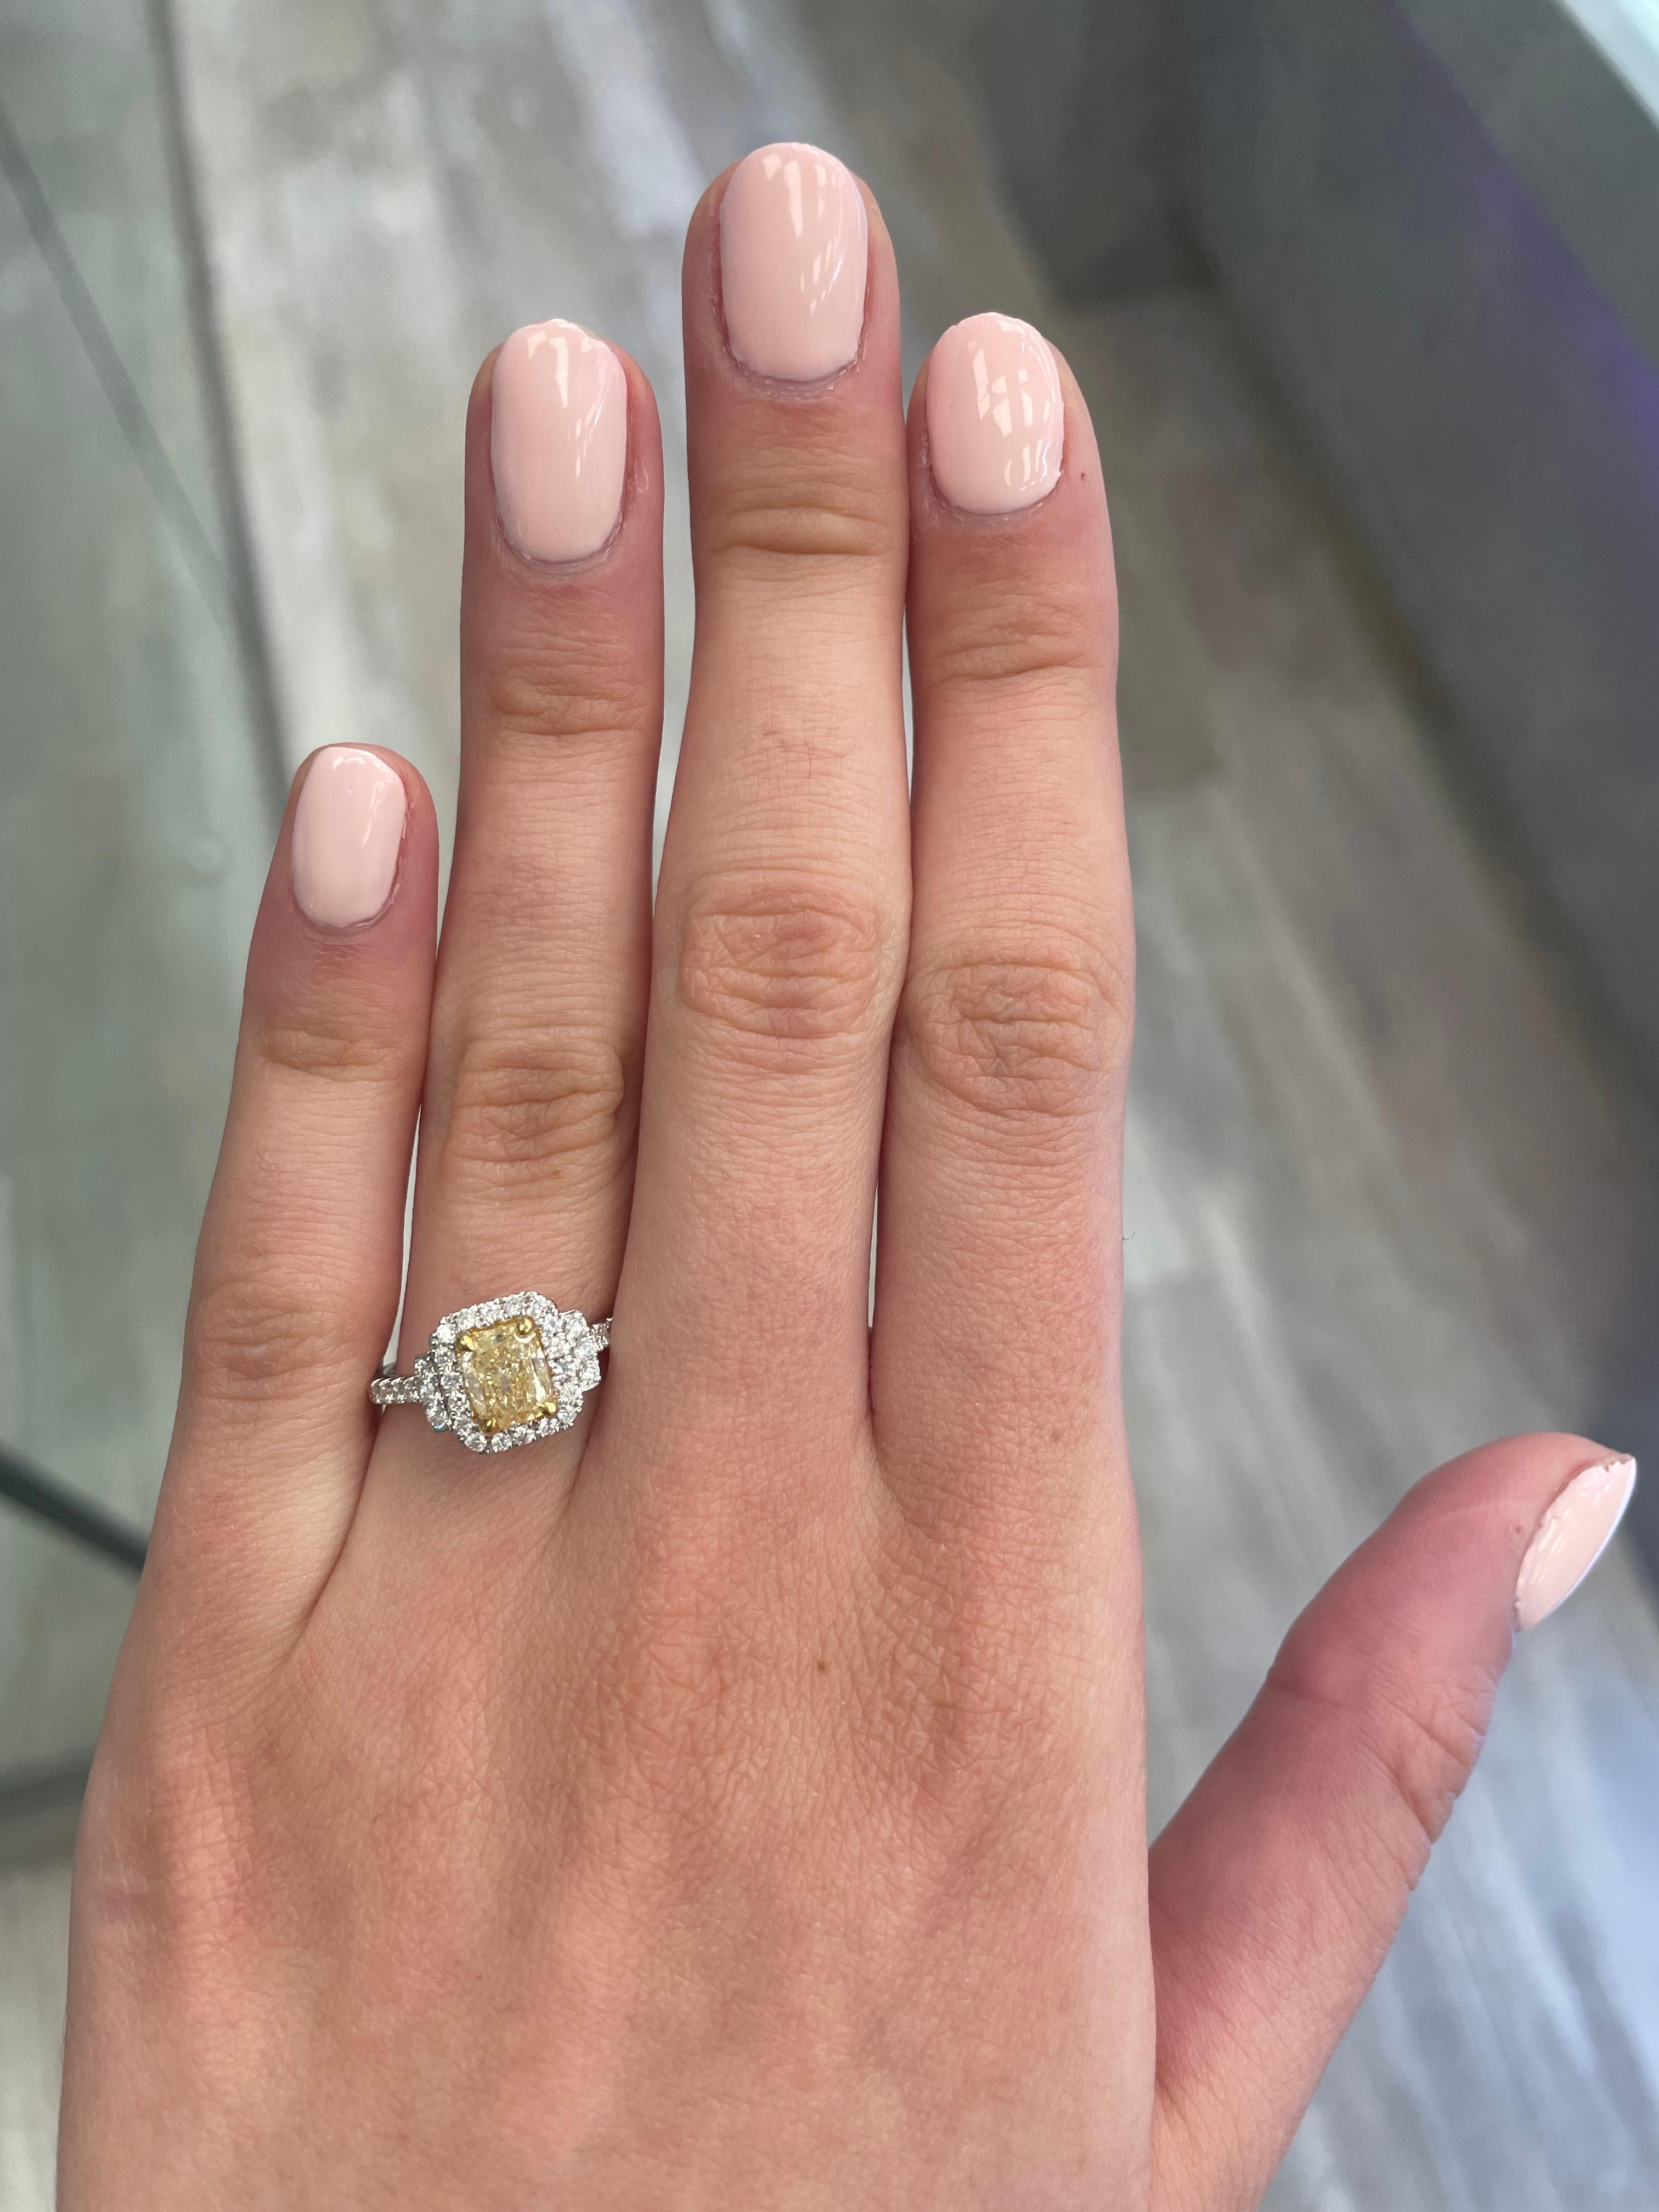 Stunning modern EGL certified yellow diamond with halo ring, two-tone 18k yellow and white gold. By Alexander Beverly Hills
1.42 carats total diamond weight.
1.04 carat cushion cut Fancy Yellow color and SI3 clarity diamond, EGL graded. Complimented